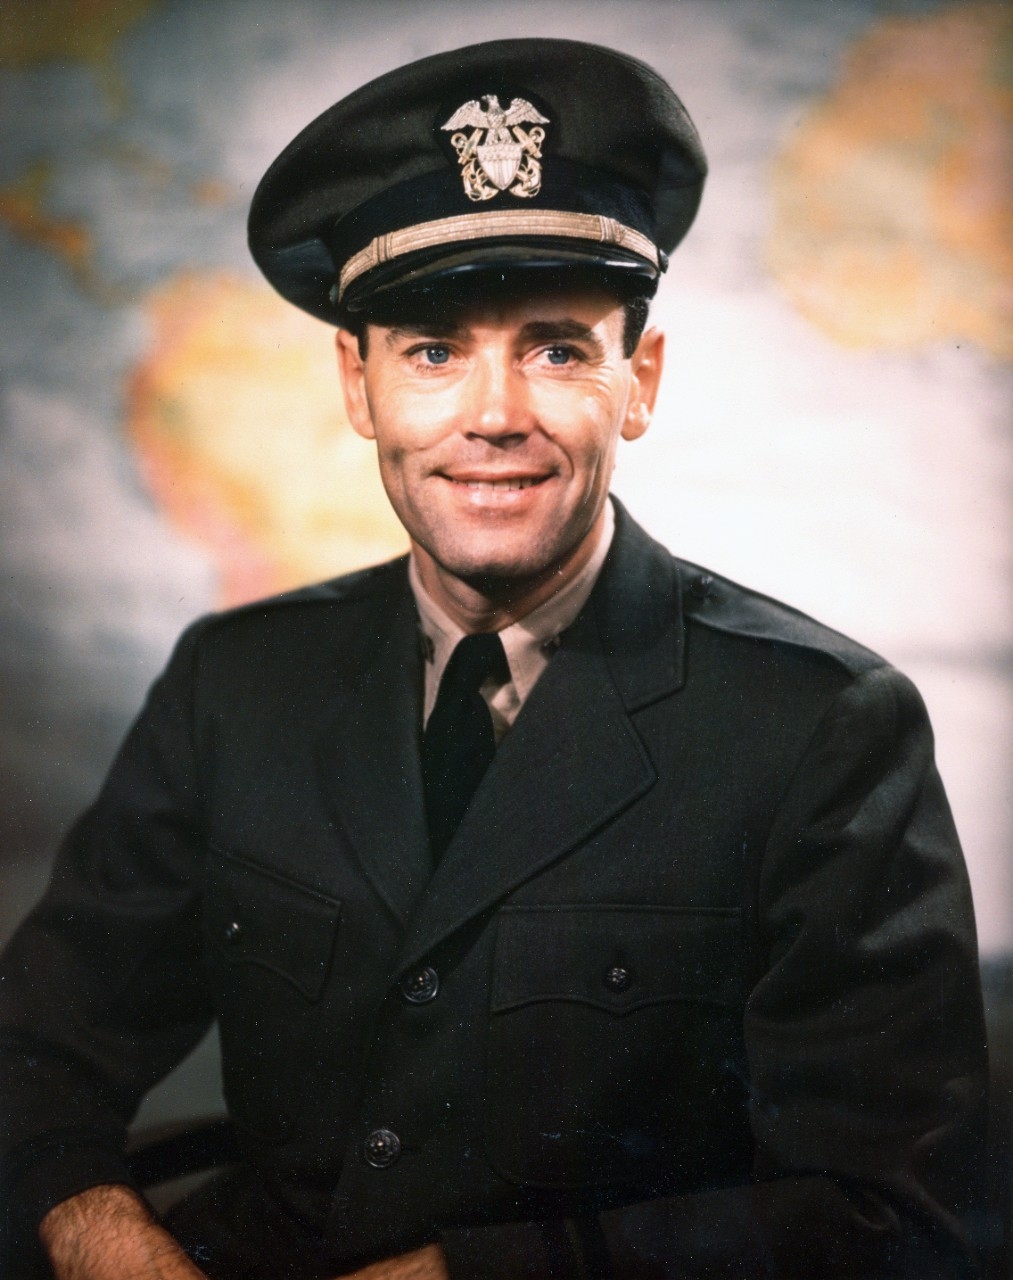 Lieutenant Henry Fonda, USNR, circa 1945. He was a noted motion picture actor in civilian life.